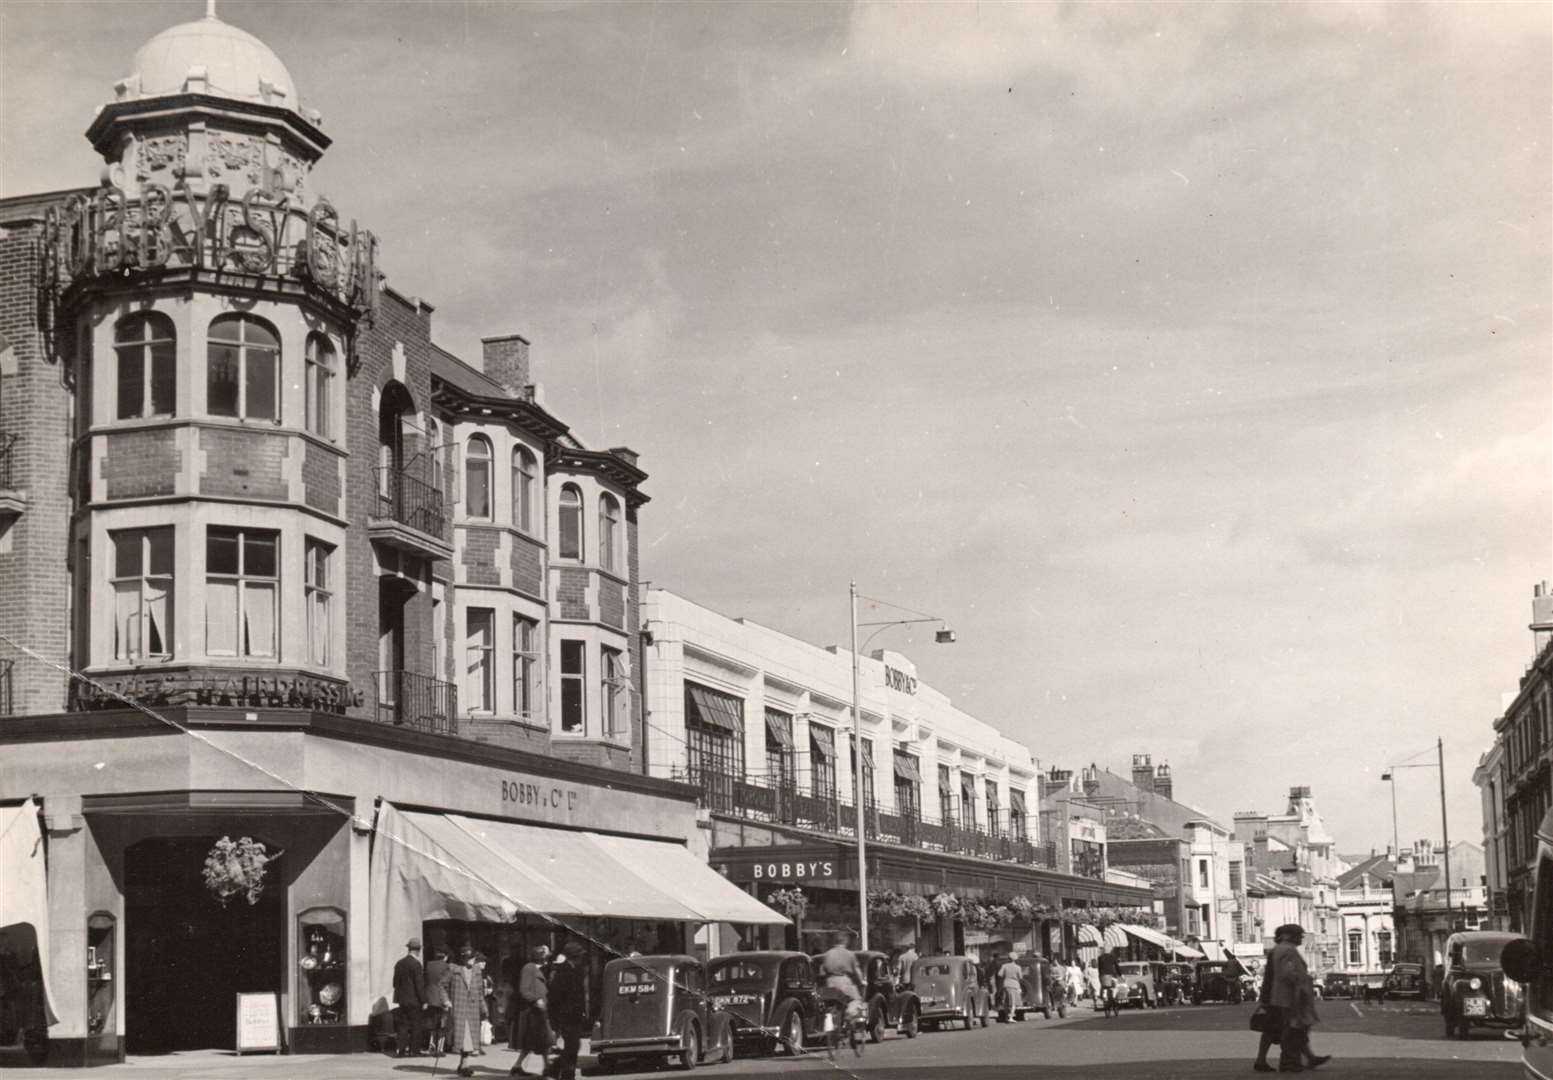 Bobby's pictured soon after its opening in 1931. Picture courtesy of Alan Taylor.